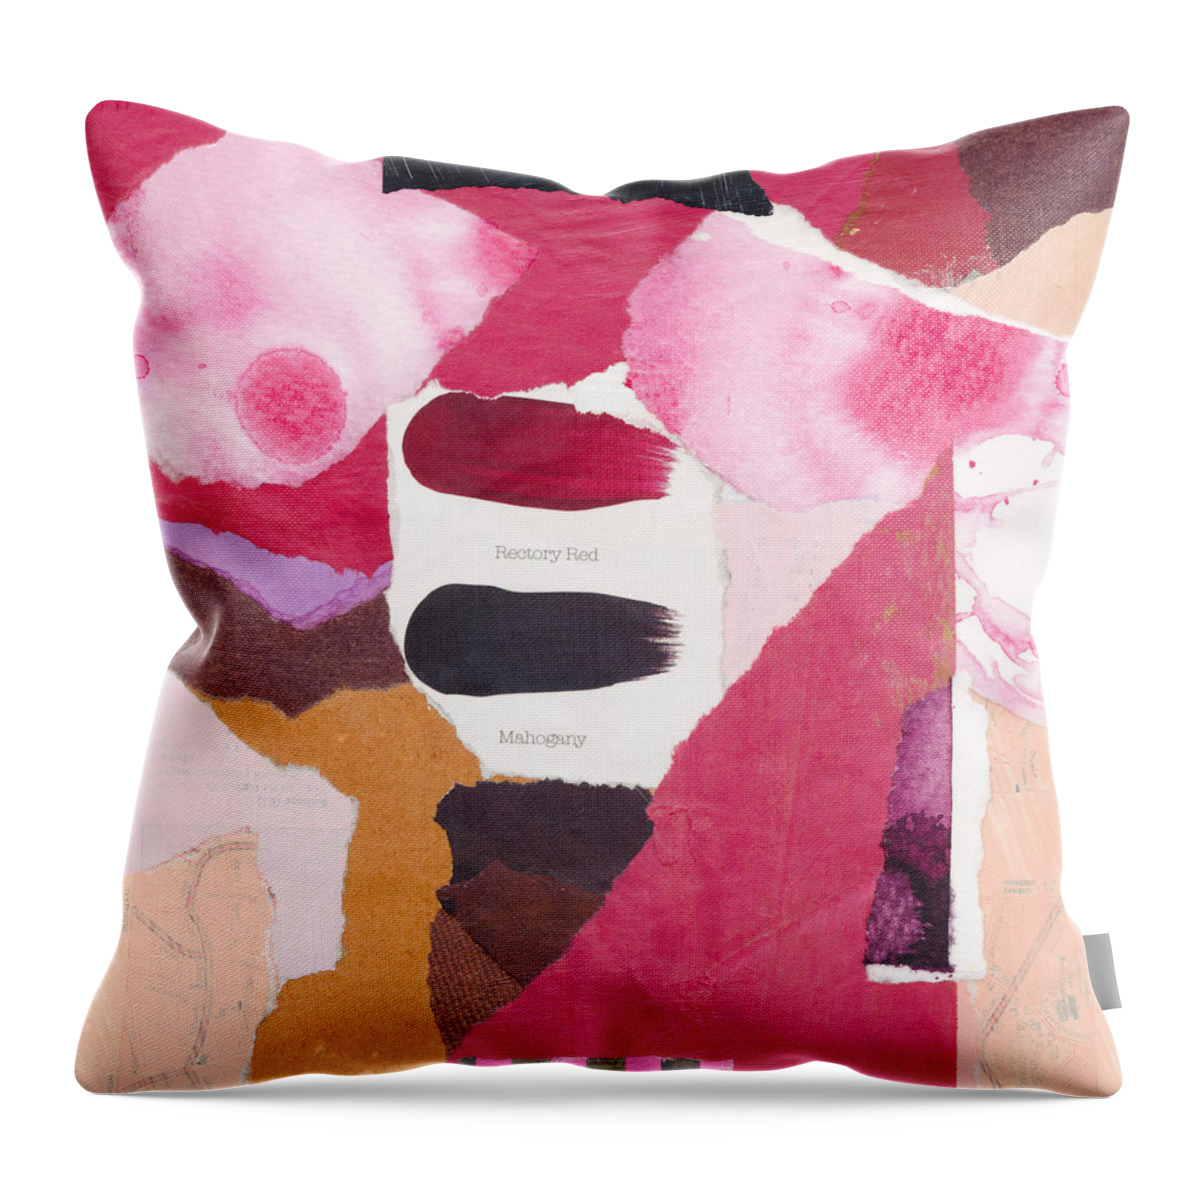 Collage Throw Pillow featuring the mixed media 0088-Tourmaline Pink by Anke Classen